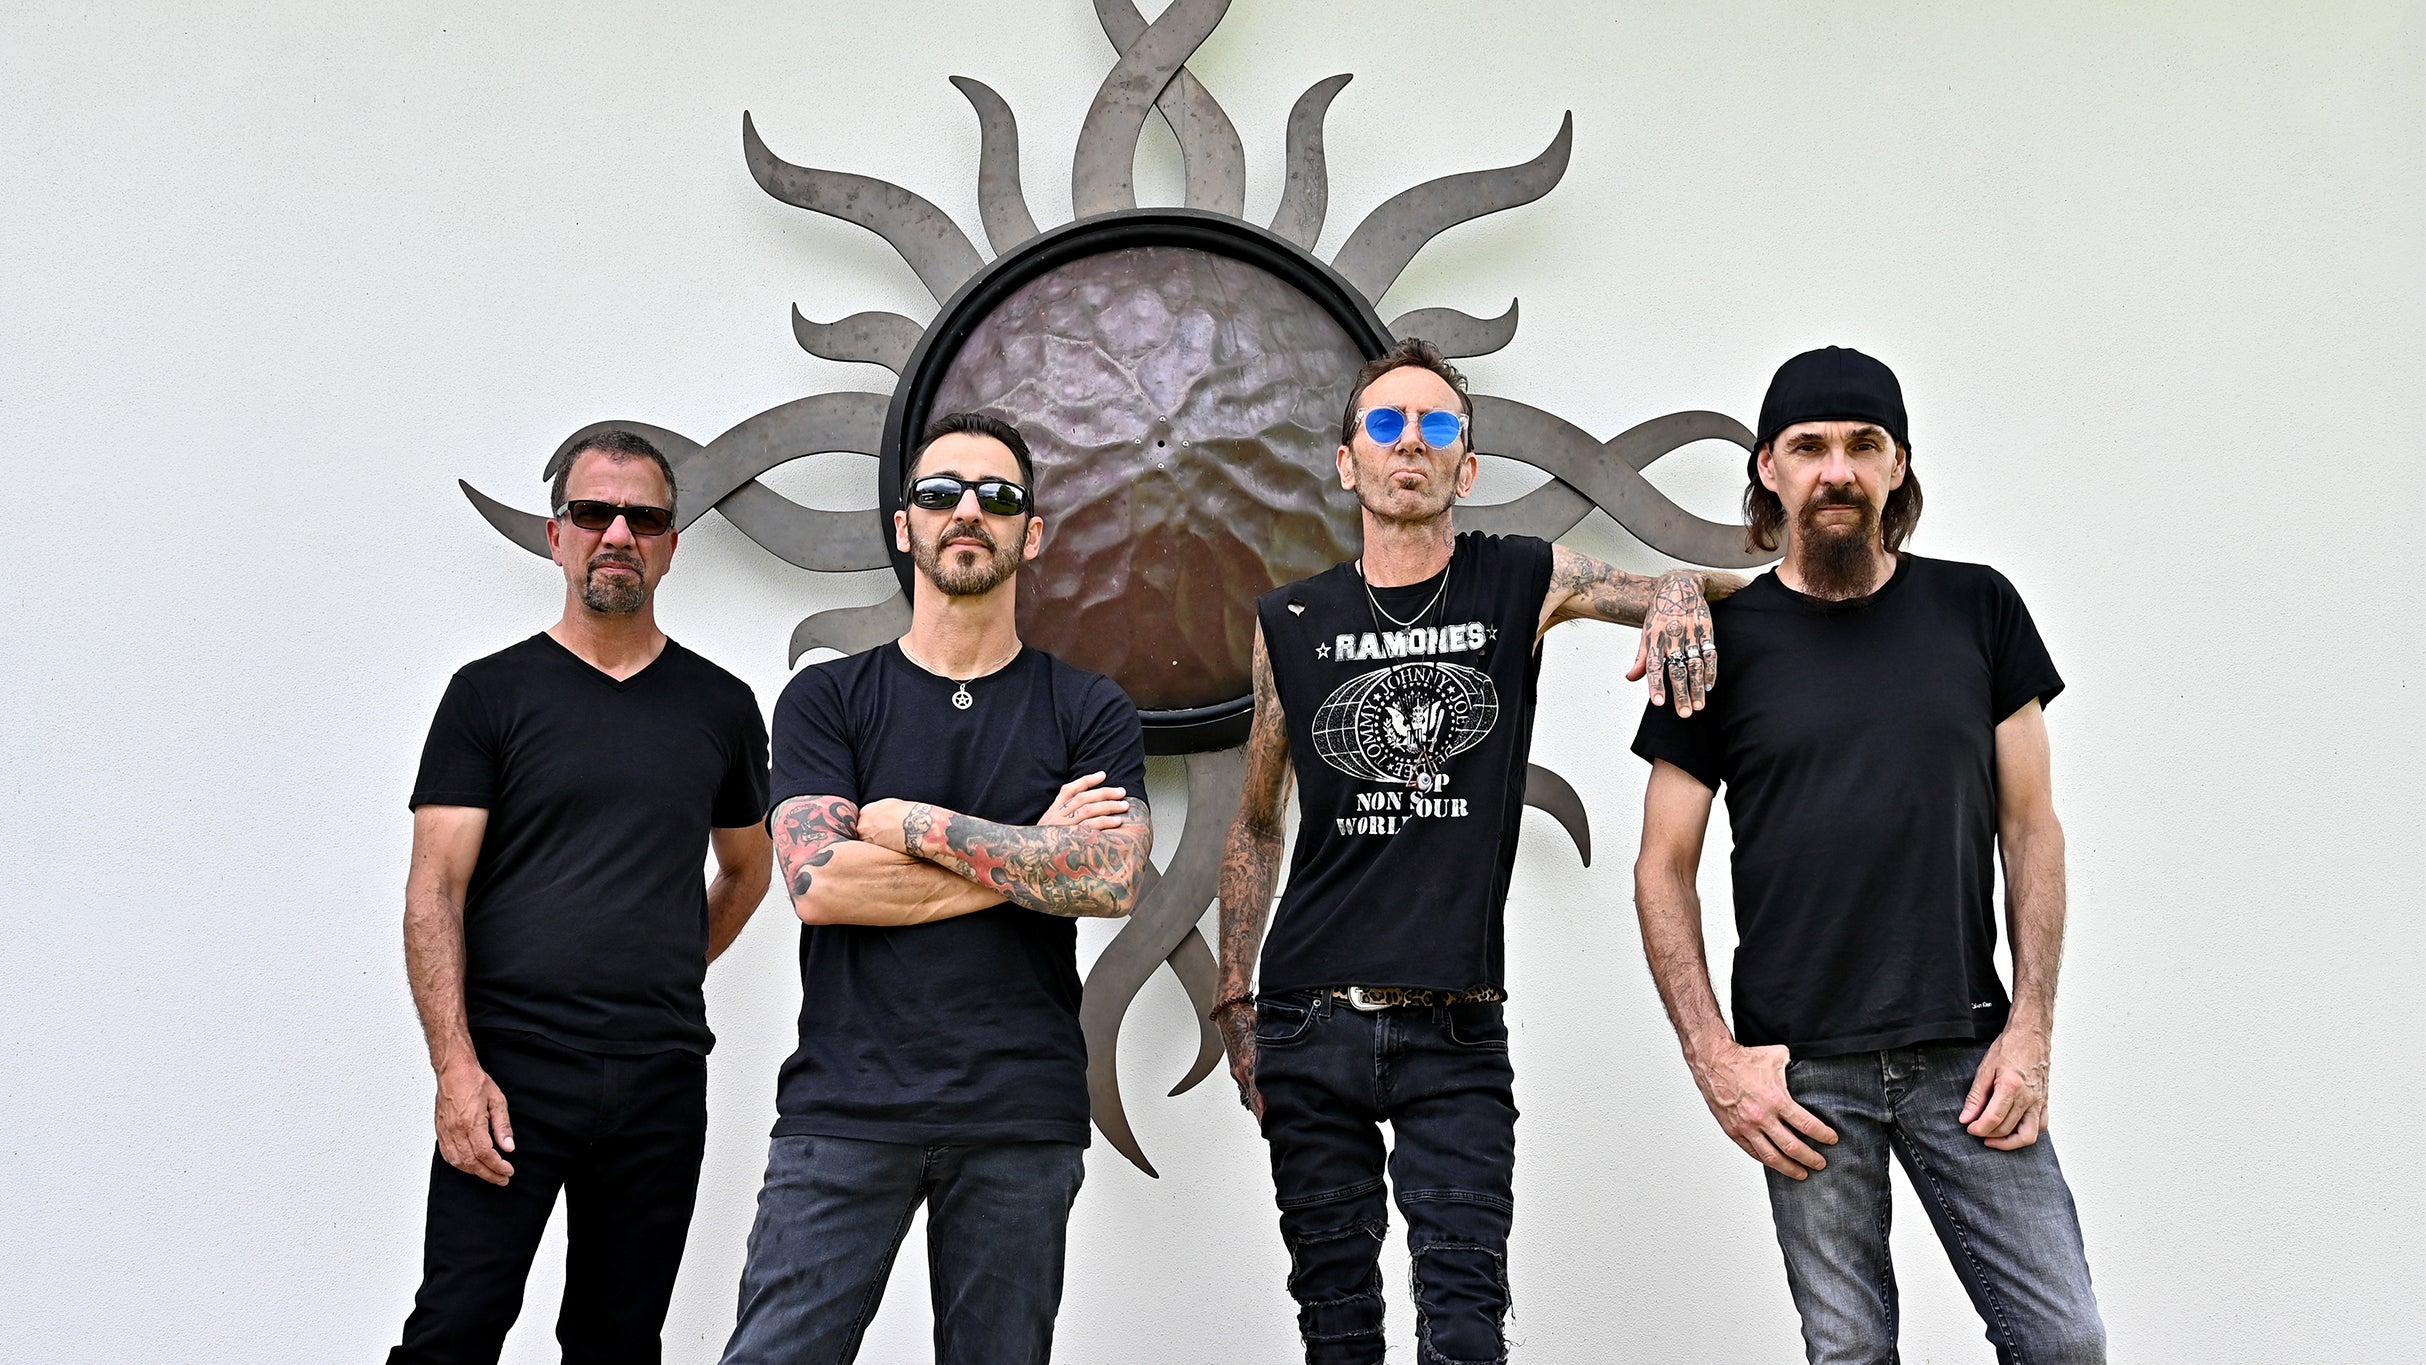 Vibez Tour - An Intimate Evening With Godsmack presale password for advance tickets in Huntsville